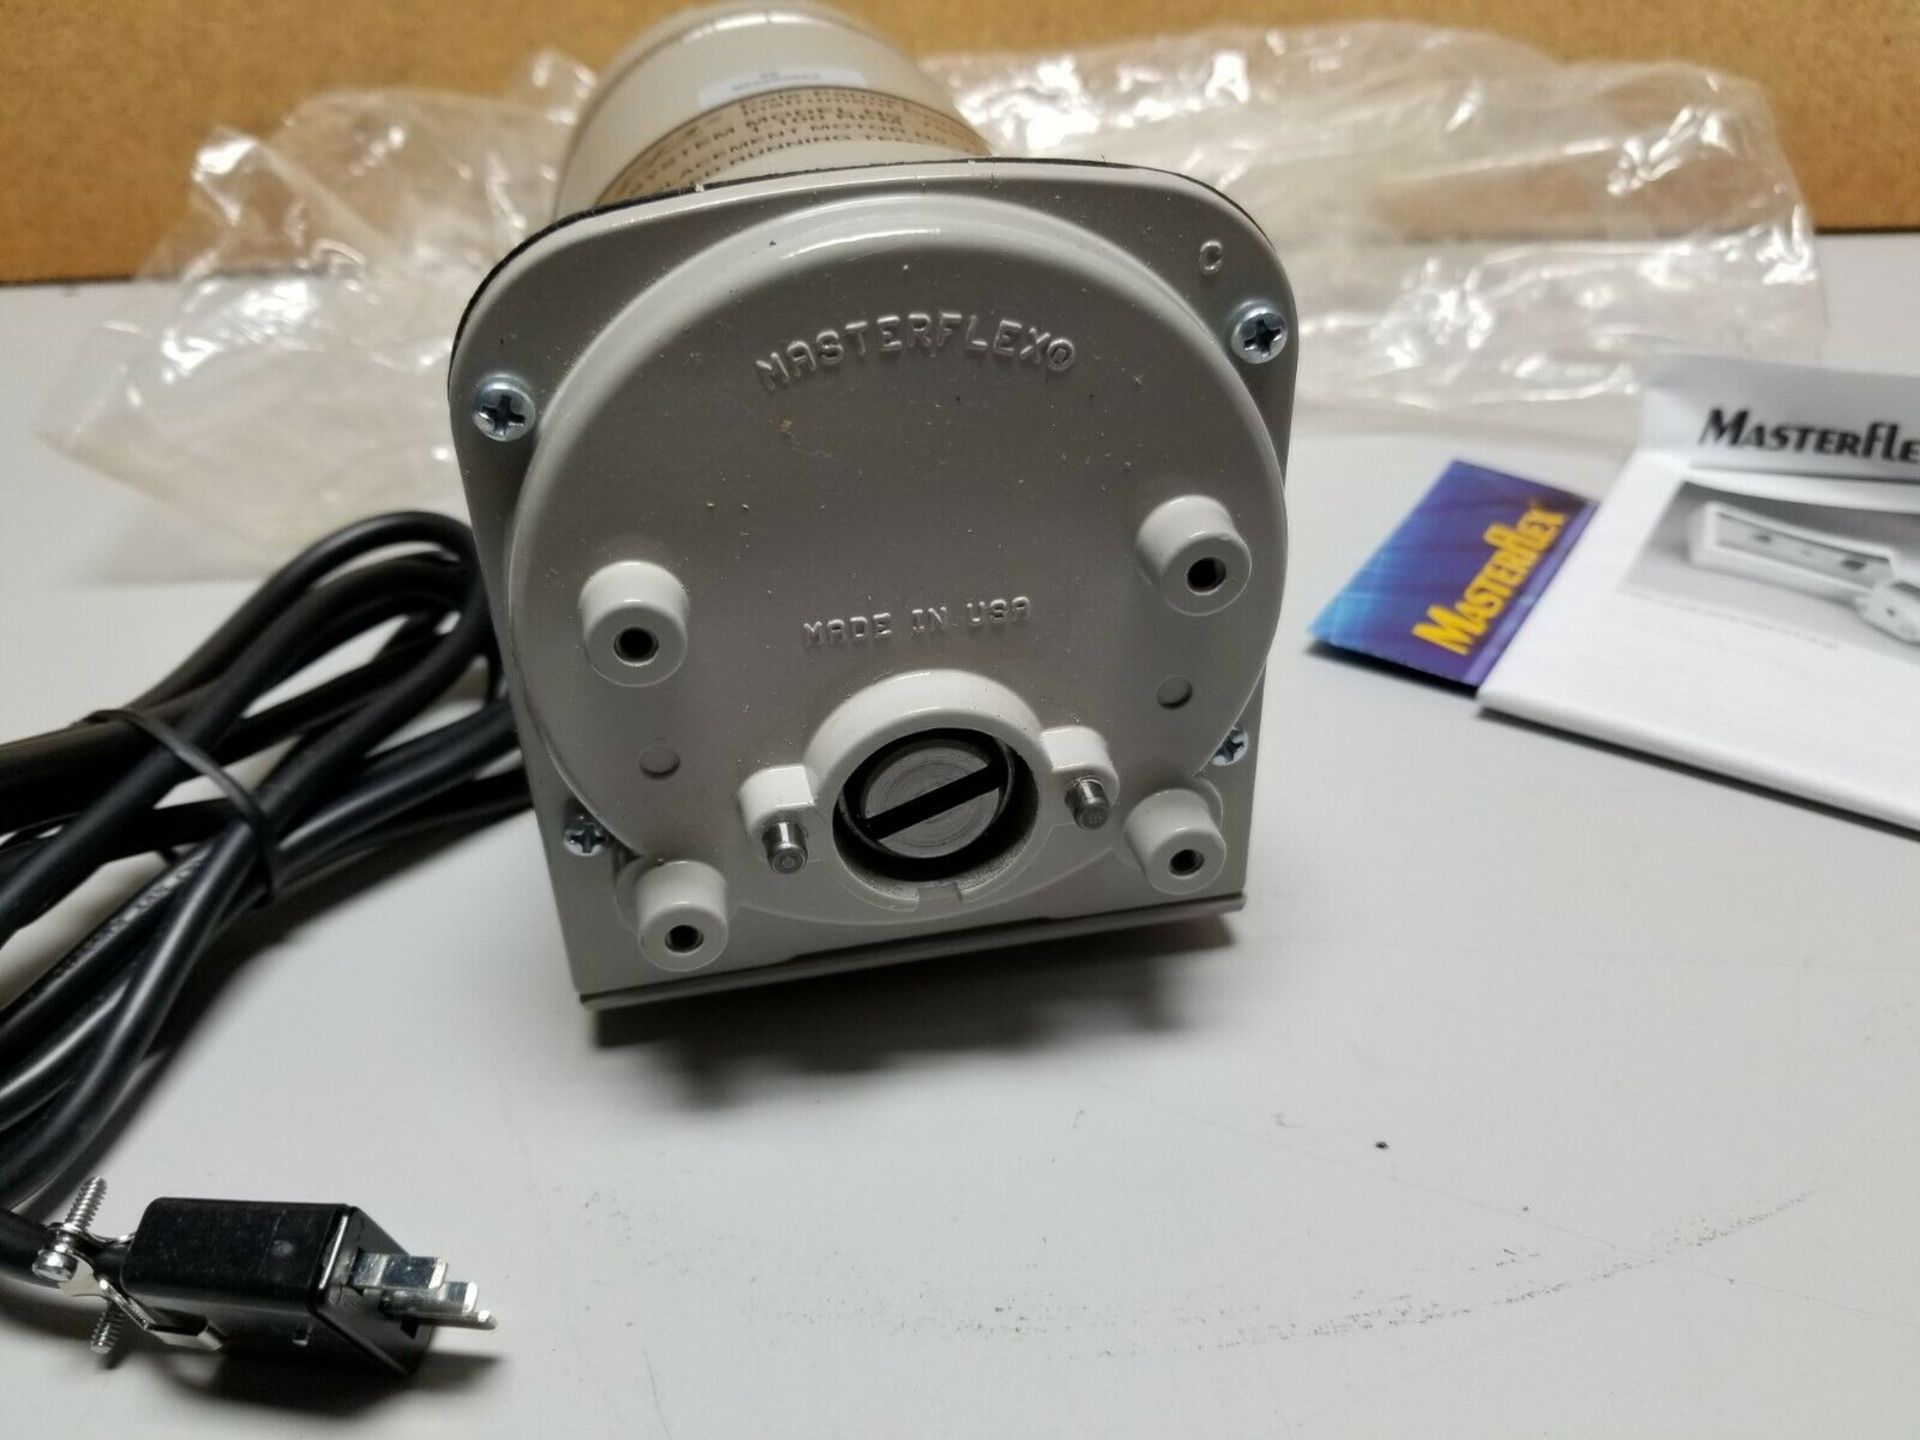 New Cole Parmer Masterflex Pump Drive/Motor - Image 6 of 9